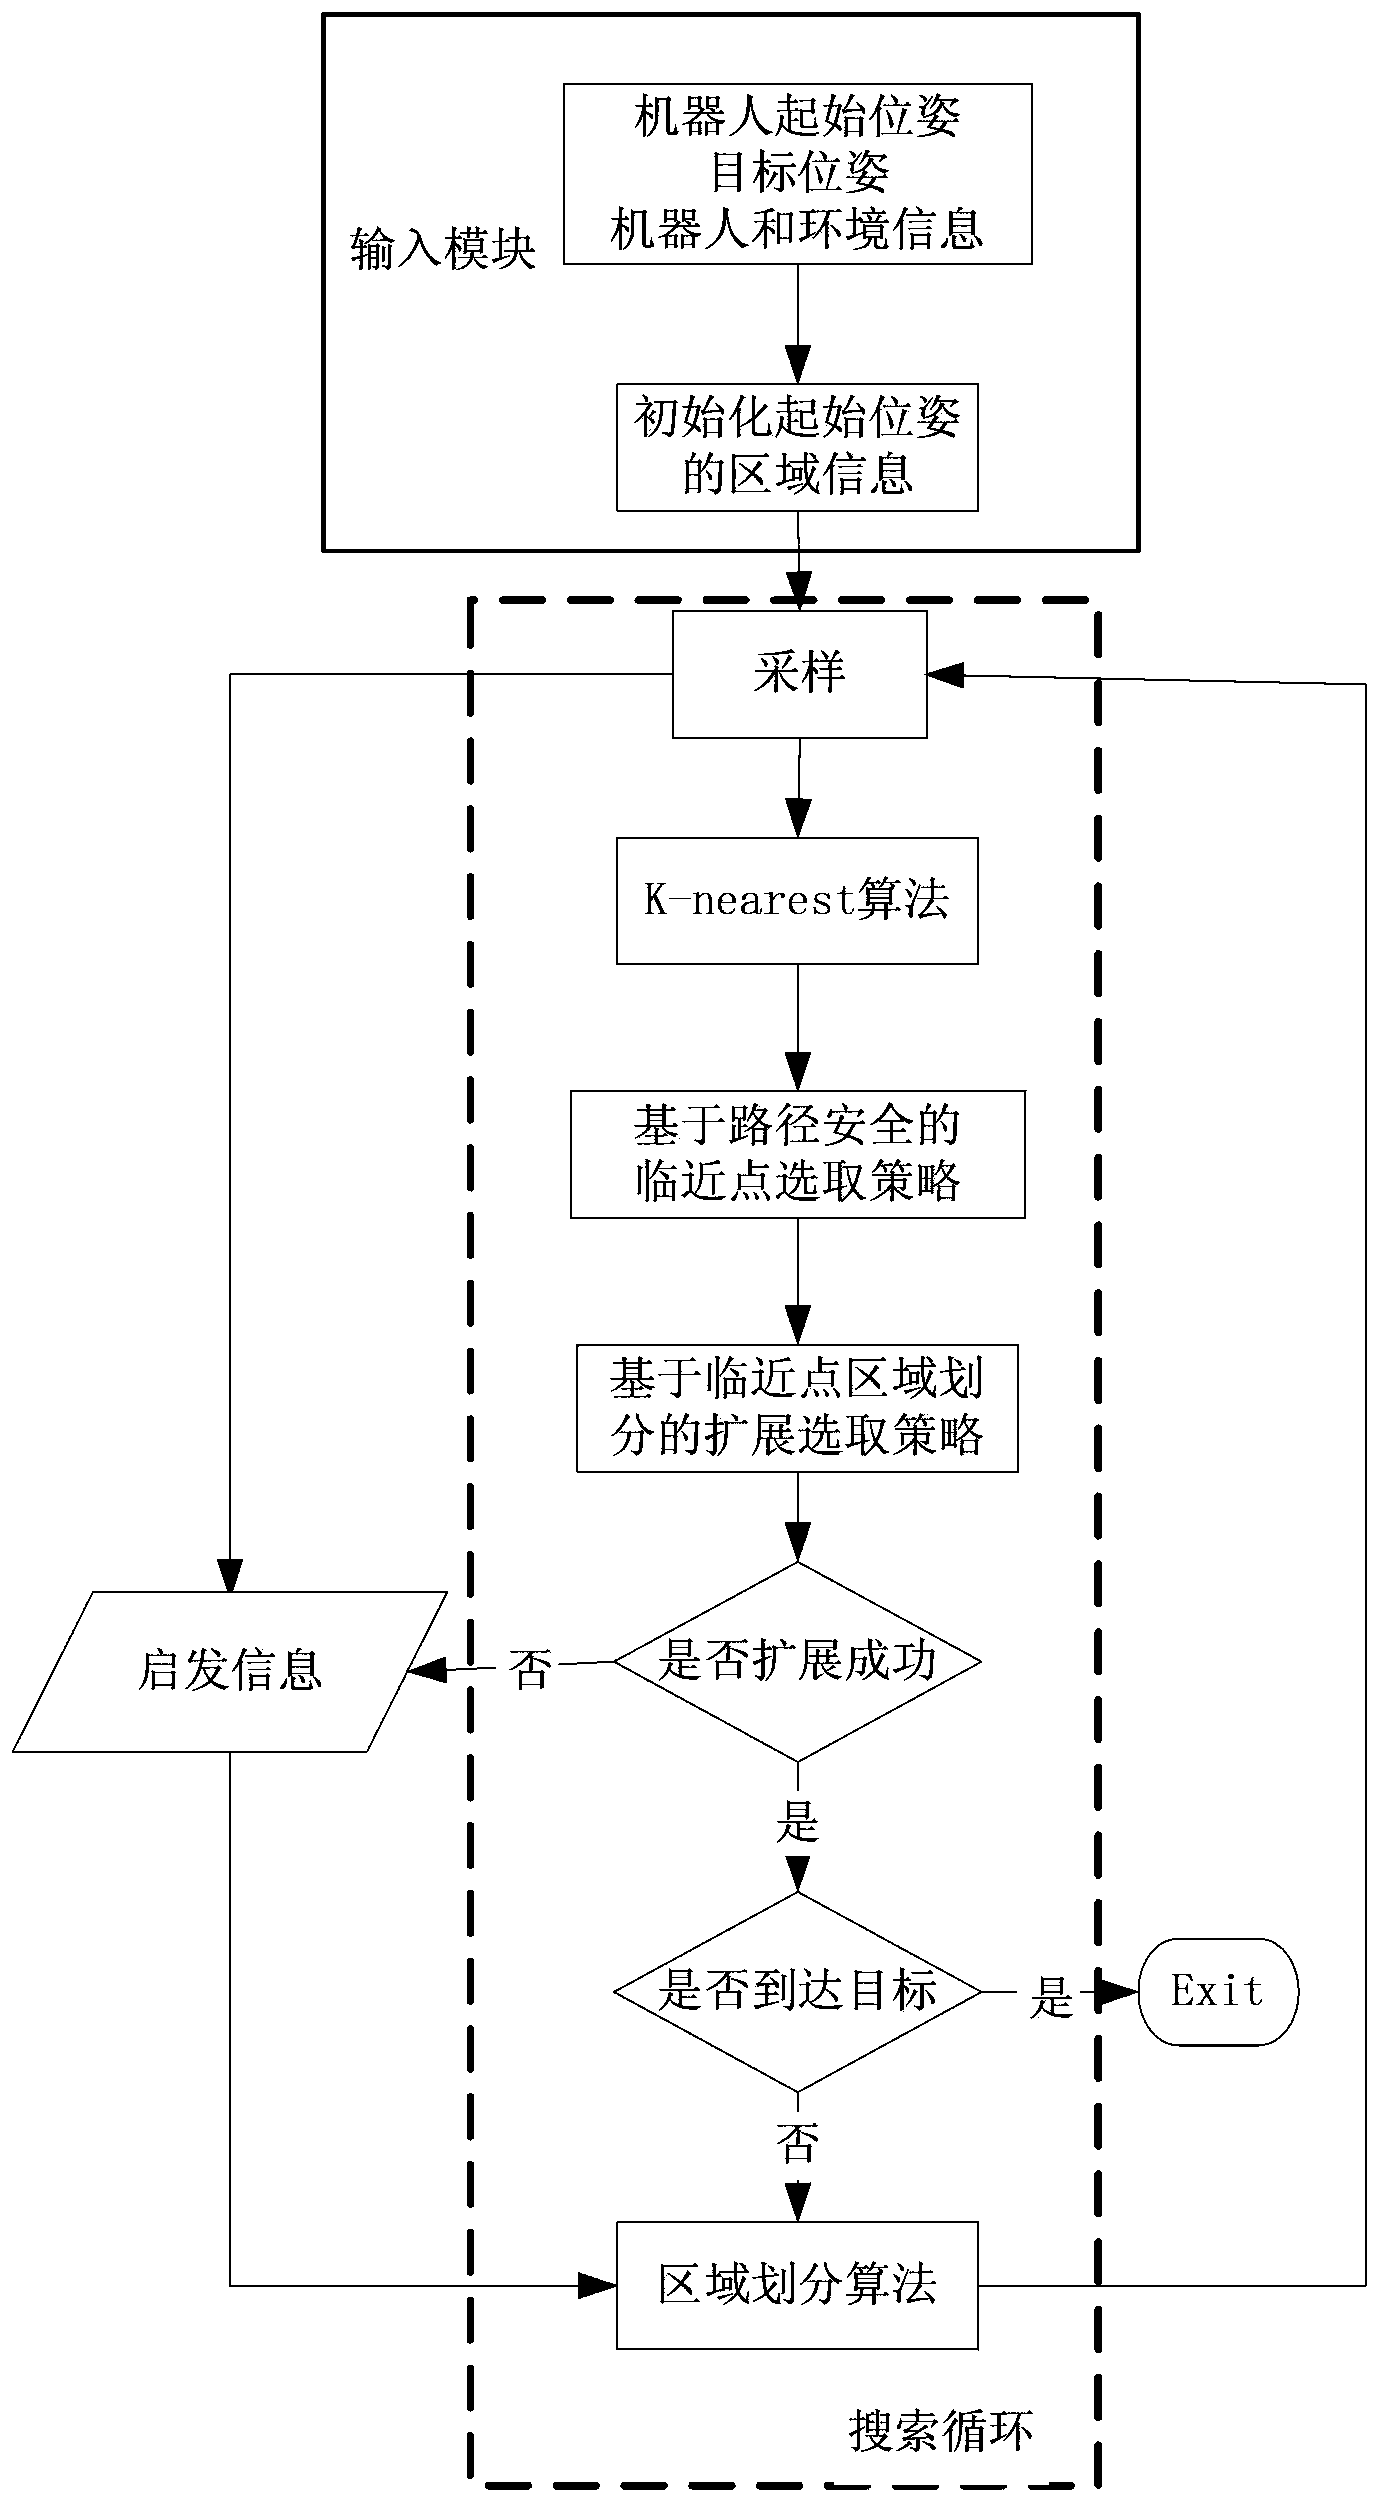 Robot safety path planning method based on dynamic region division